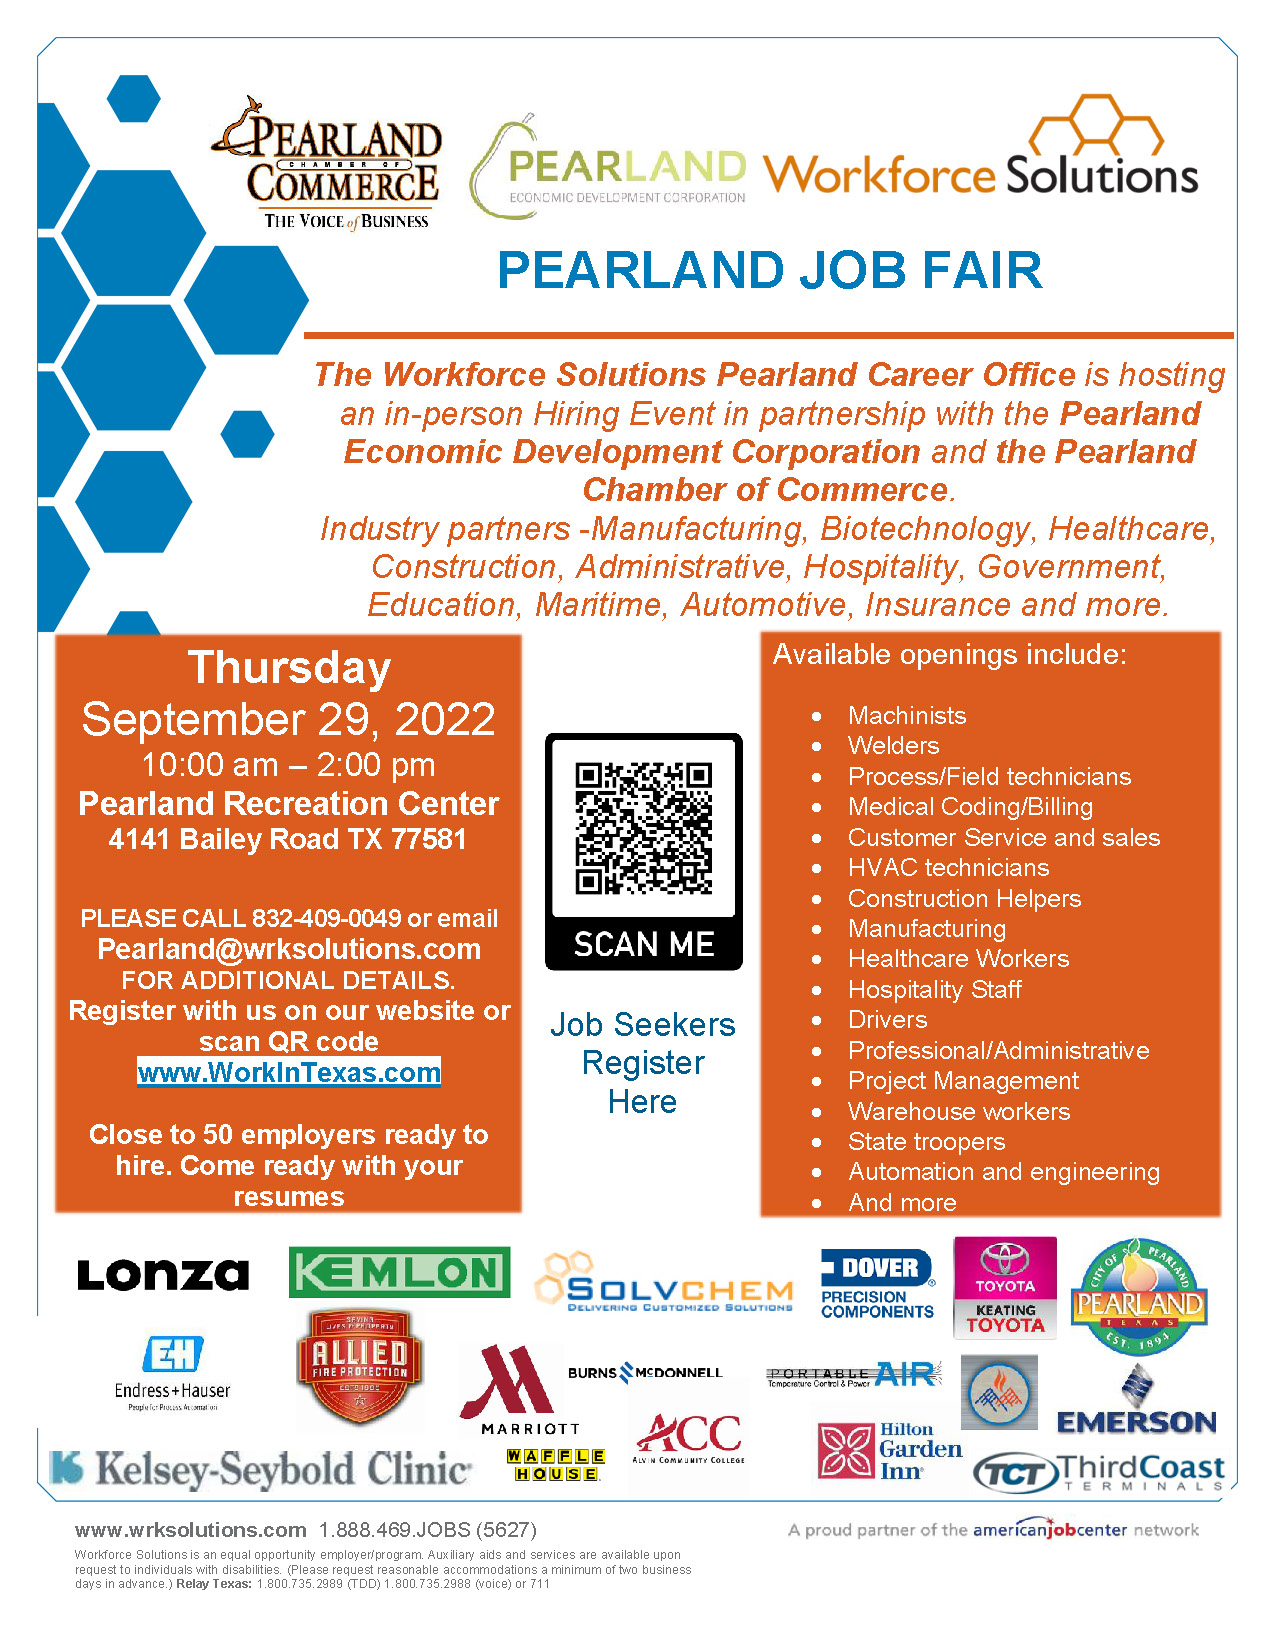 PEDC, Pearland Chamber and Workforce Solutions to Host Job Fair on